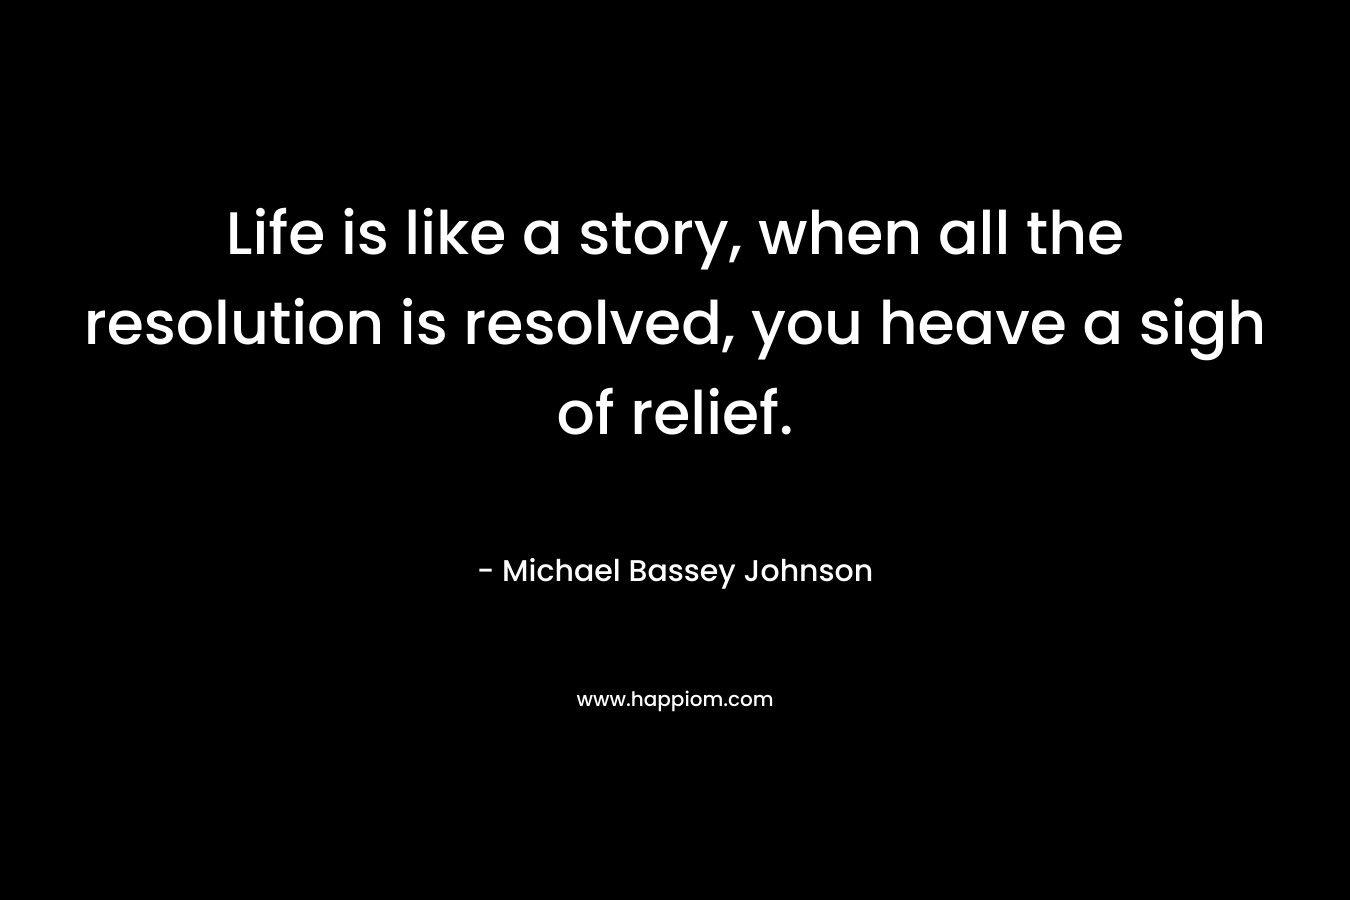 Life is like a story, when all the resolution is resolved, you heave a sigh of relief. – Michael Bassey Johnson